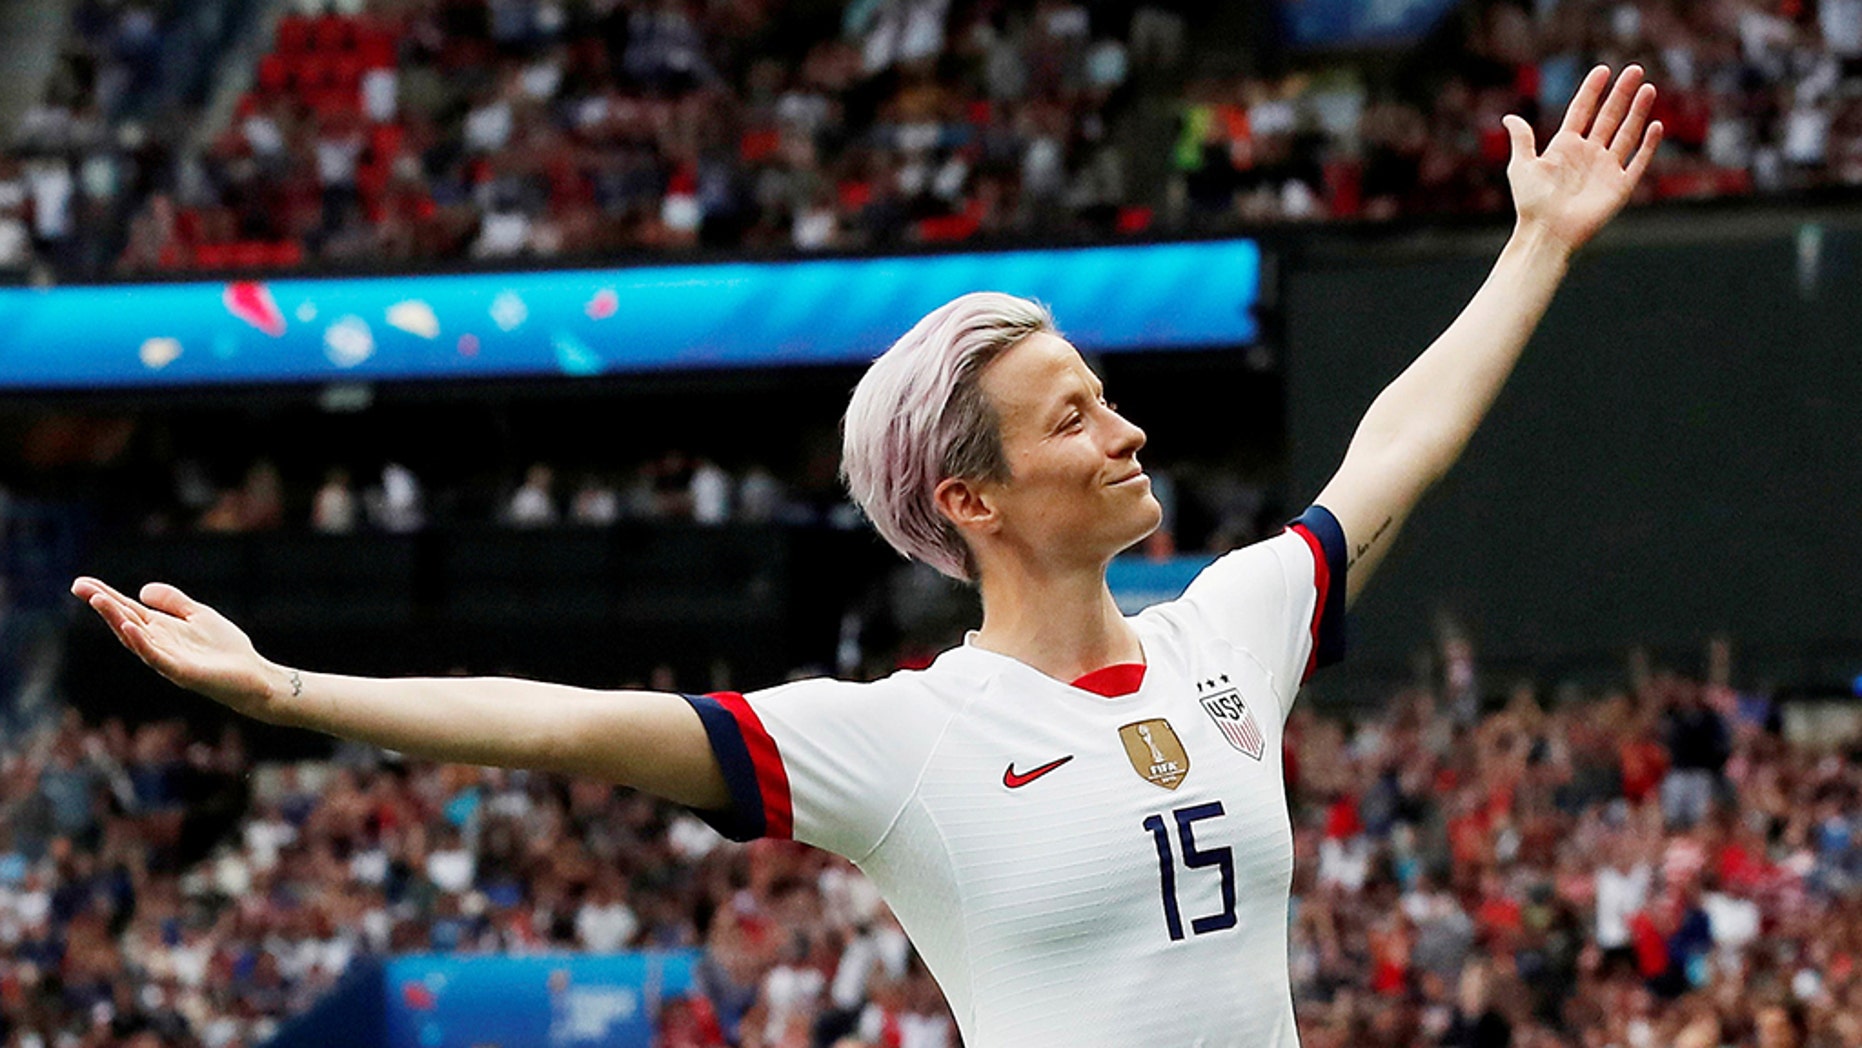 The US teams victory goes beyond soccer